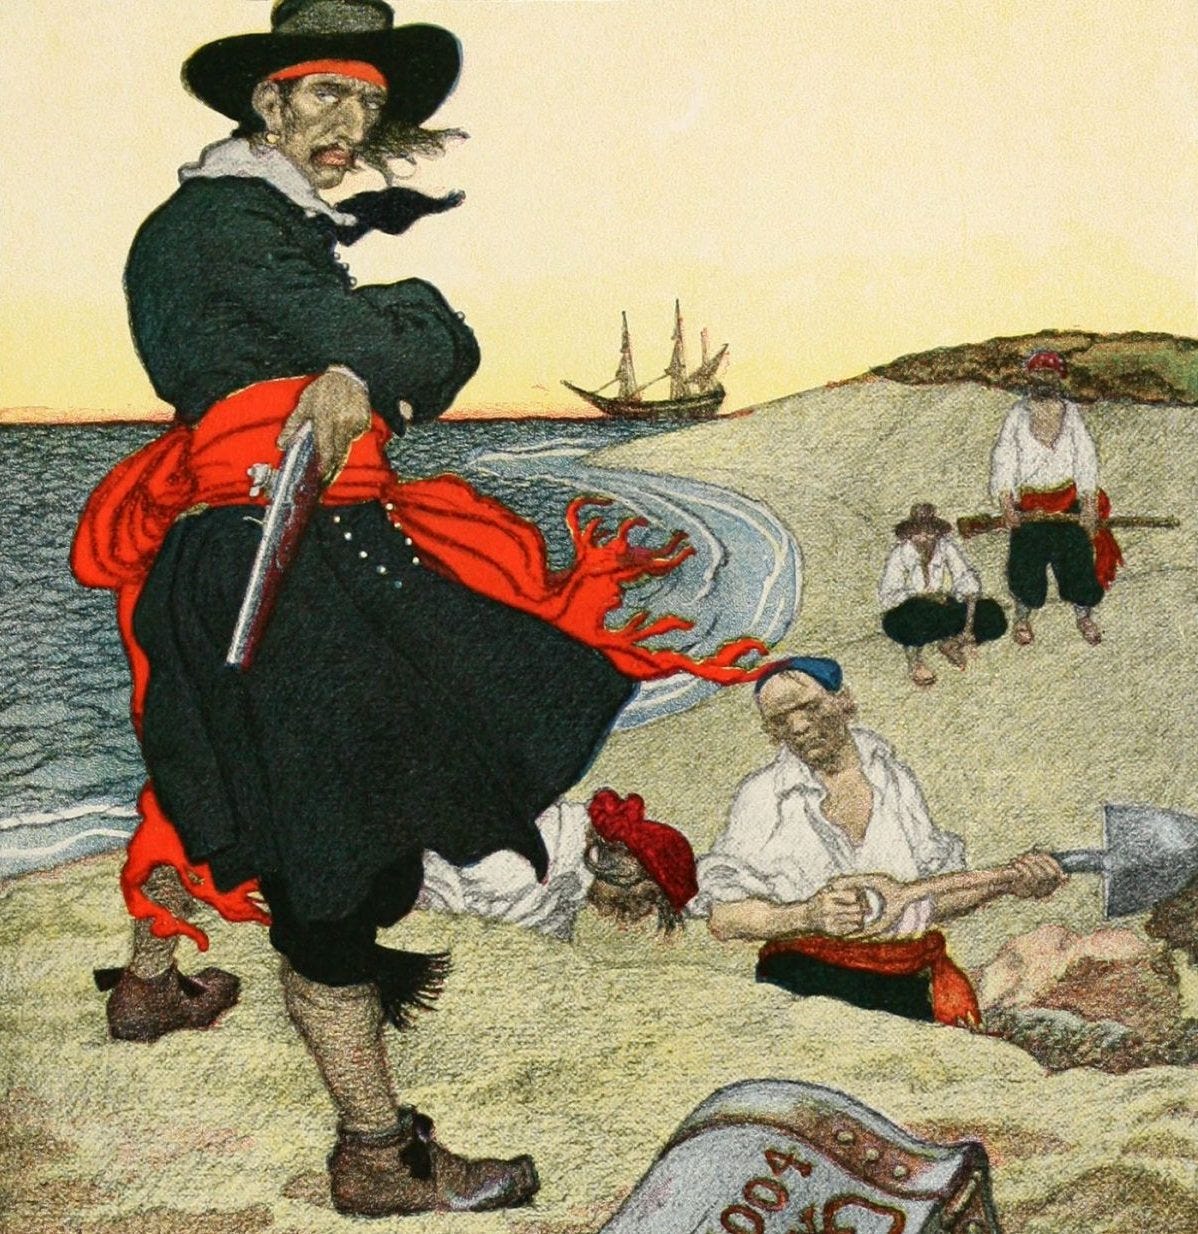 Here Be Pirates: Howard Pyle's illustrations for Blood-Thirsty Buccaneers  and Cut-Throat Marauders - Flashbak